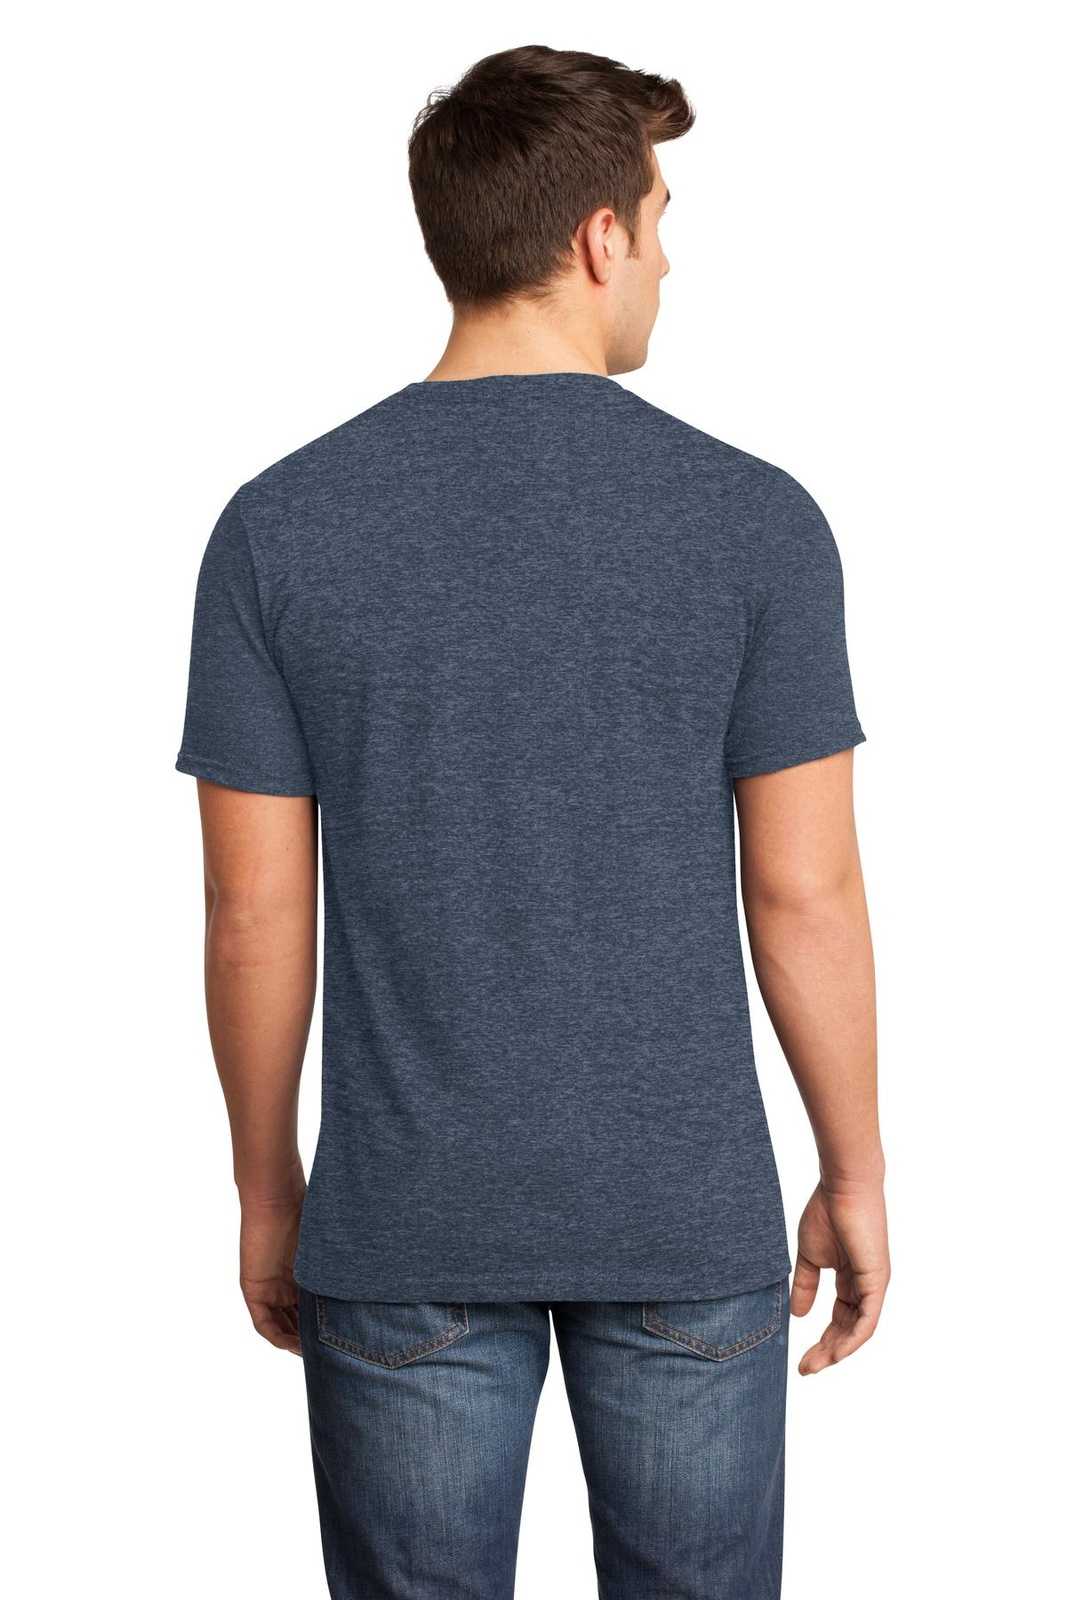 District DT6500 Very Important Tee V-Neck - Heathered Navy - HIT a Double - 2